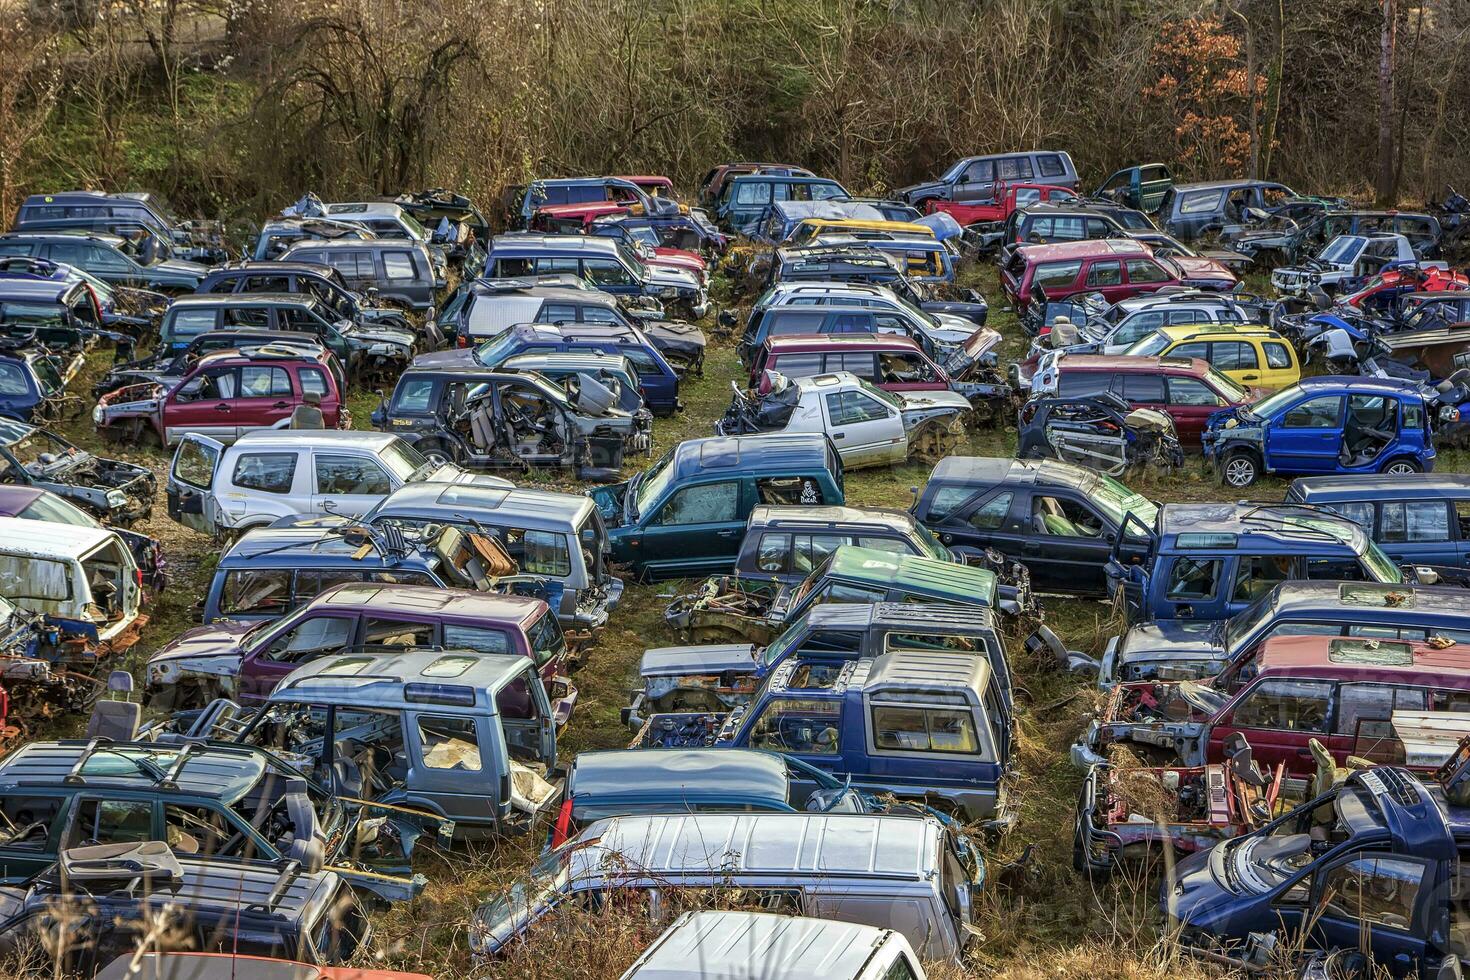 Many cars in a scrapyard with bonnets up and parts missing like tires photo